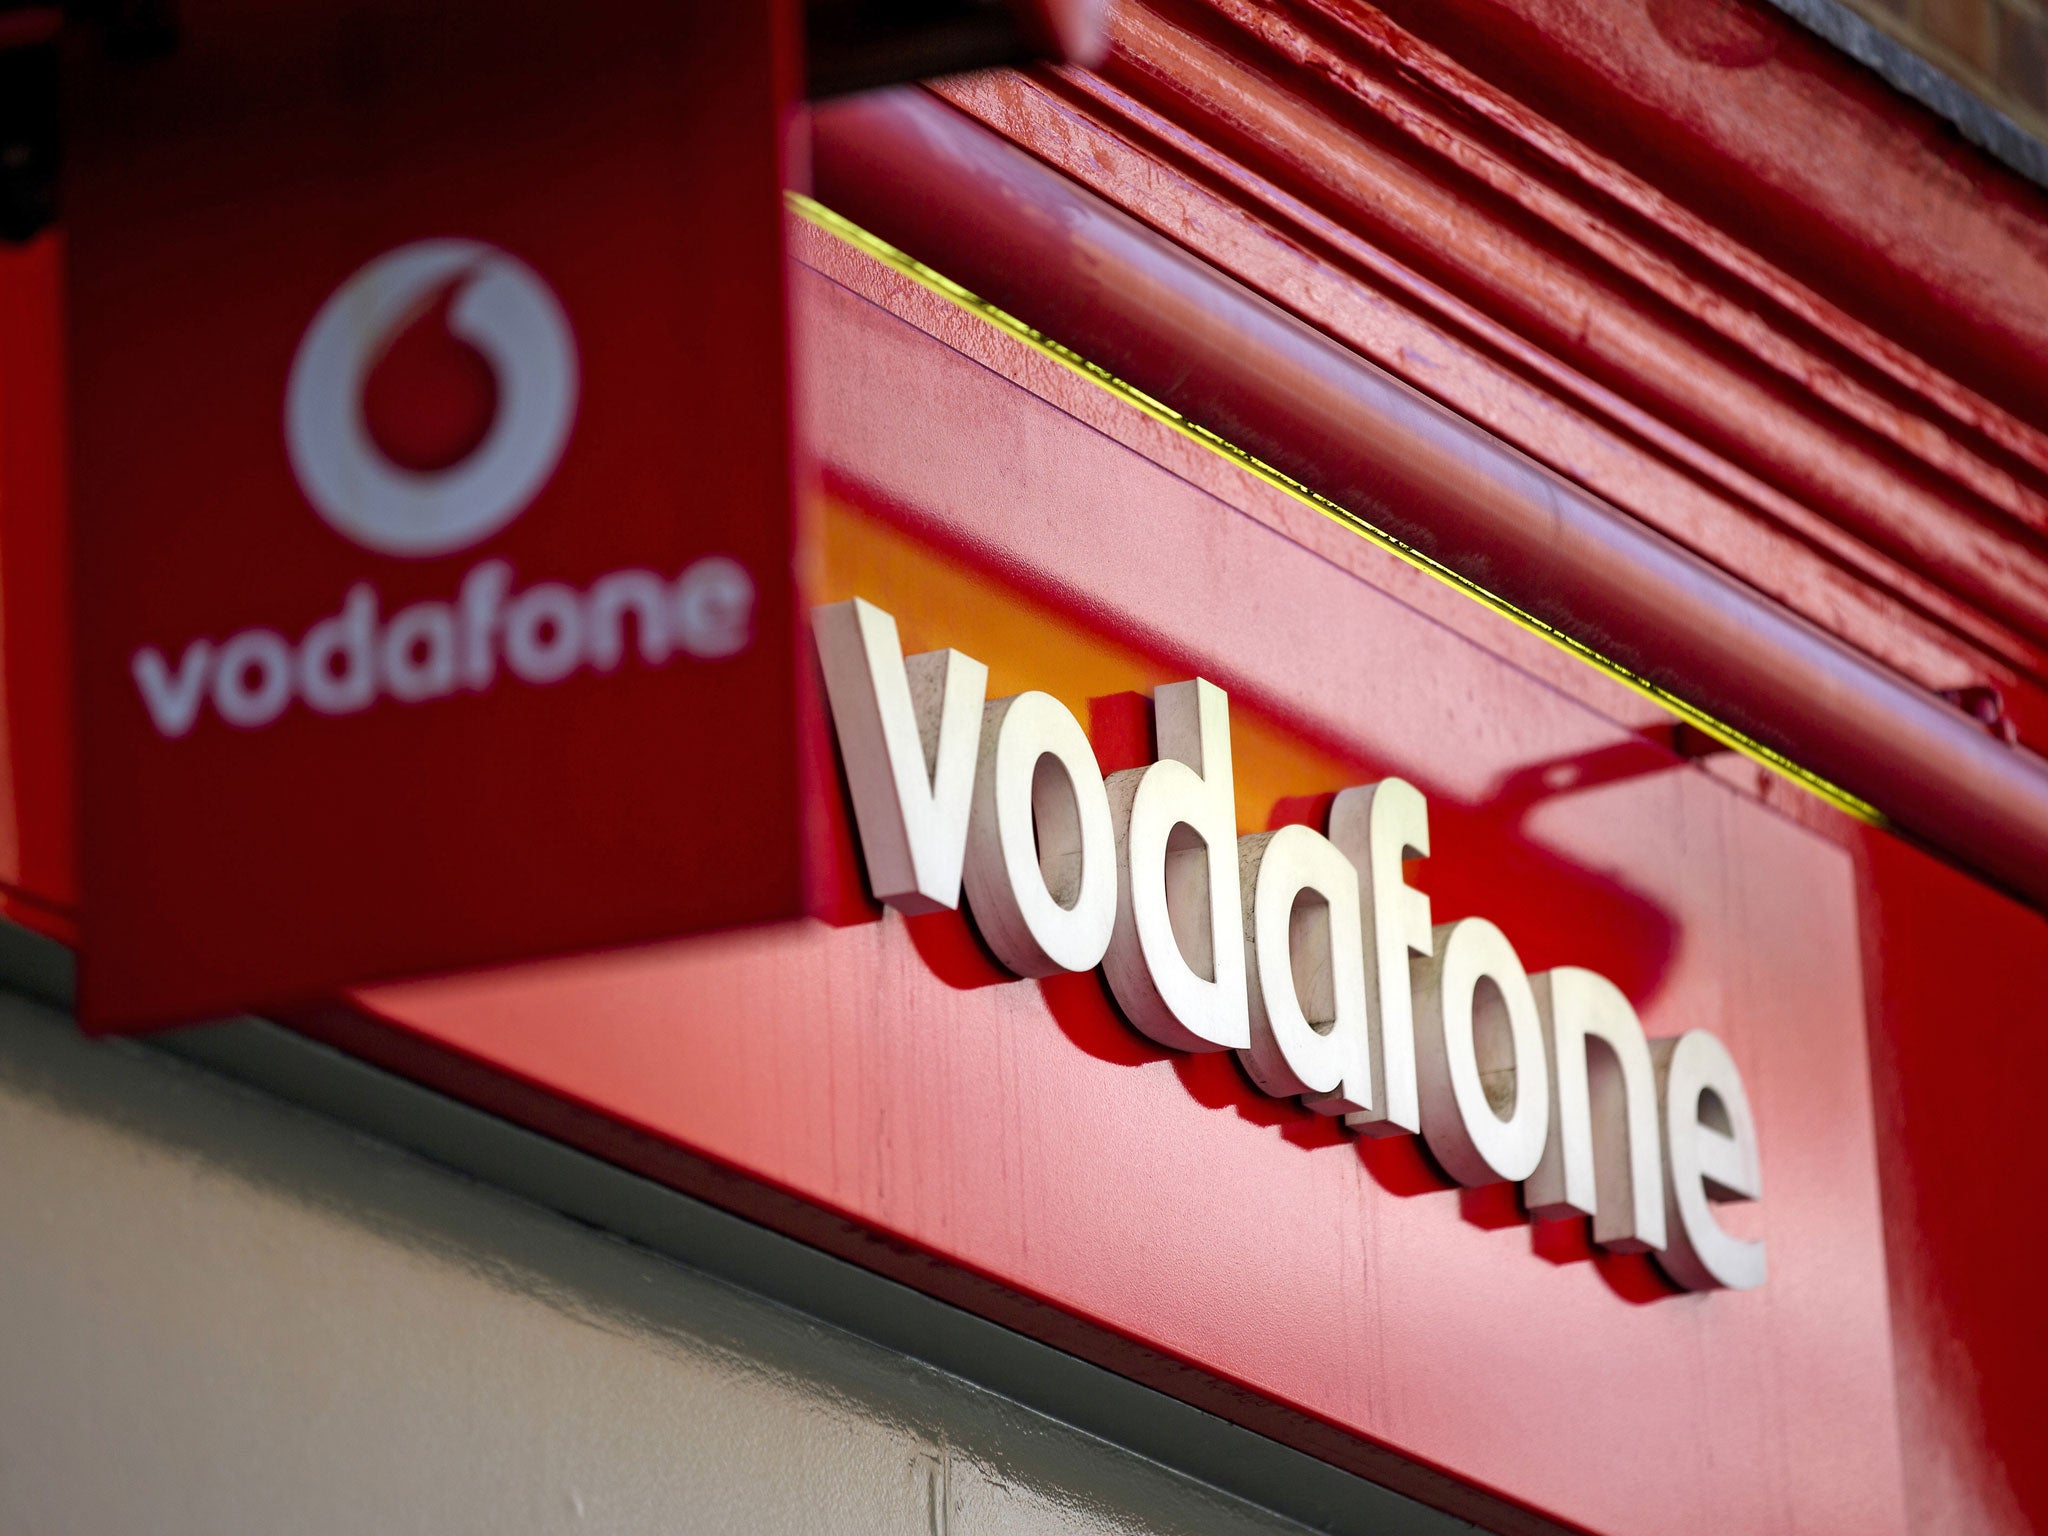 Vodafone customers have been hit by intermittent outages of text messages and other mobile phone services